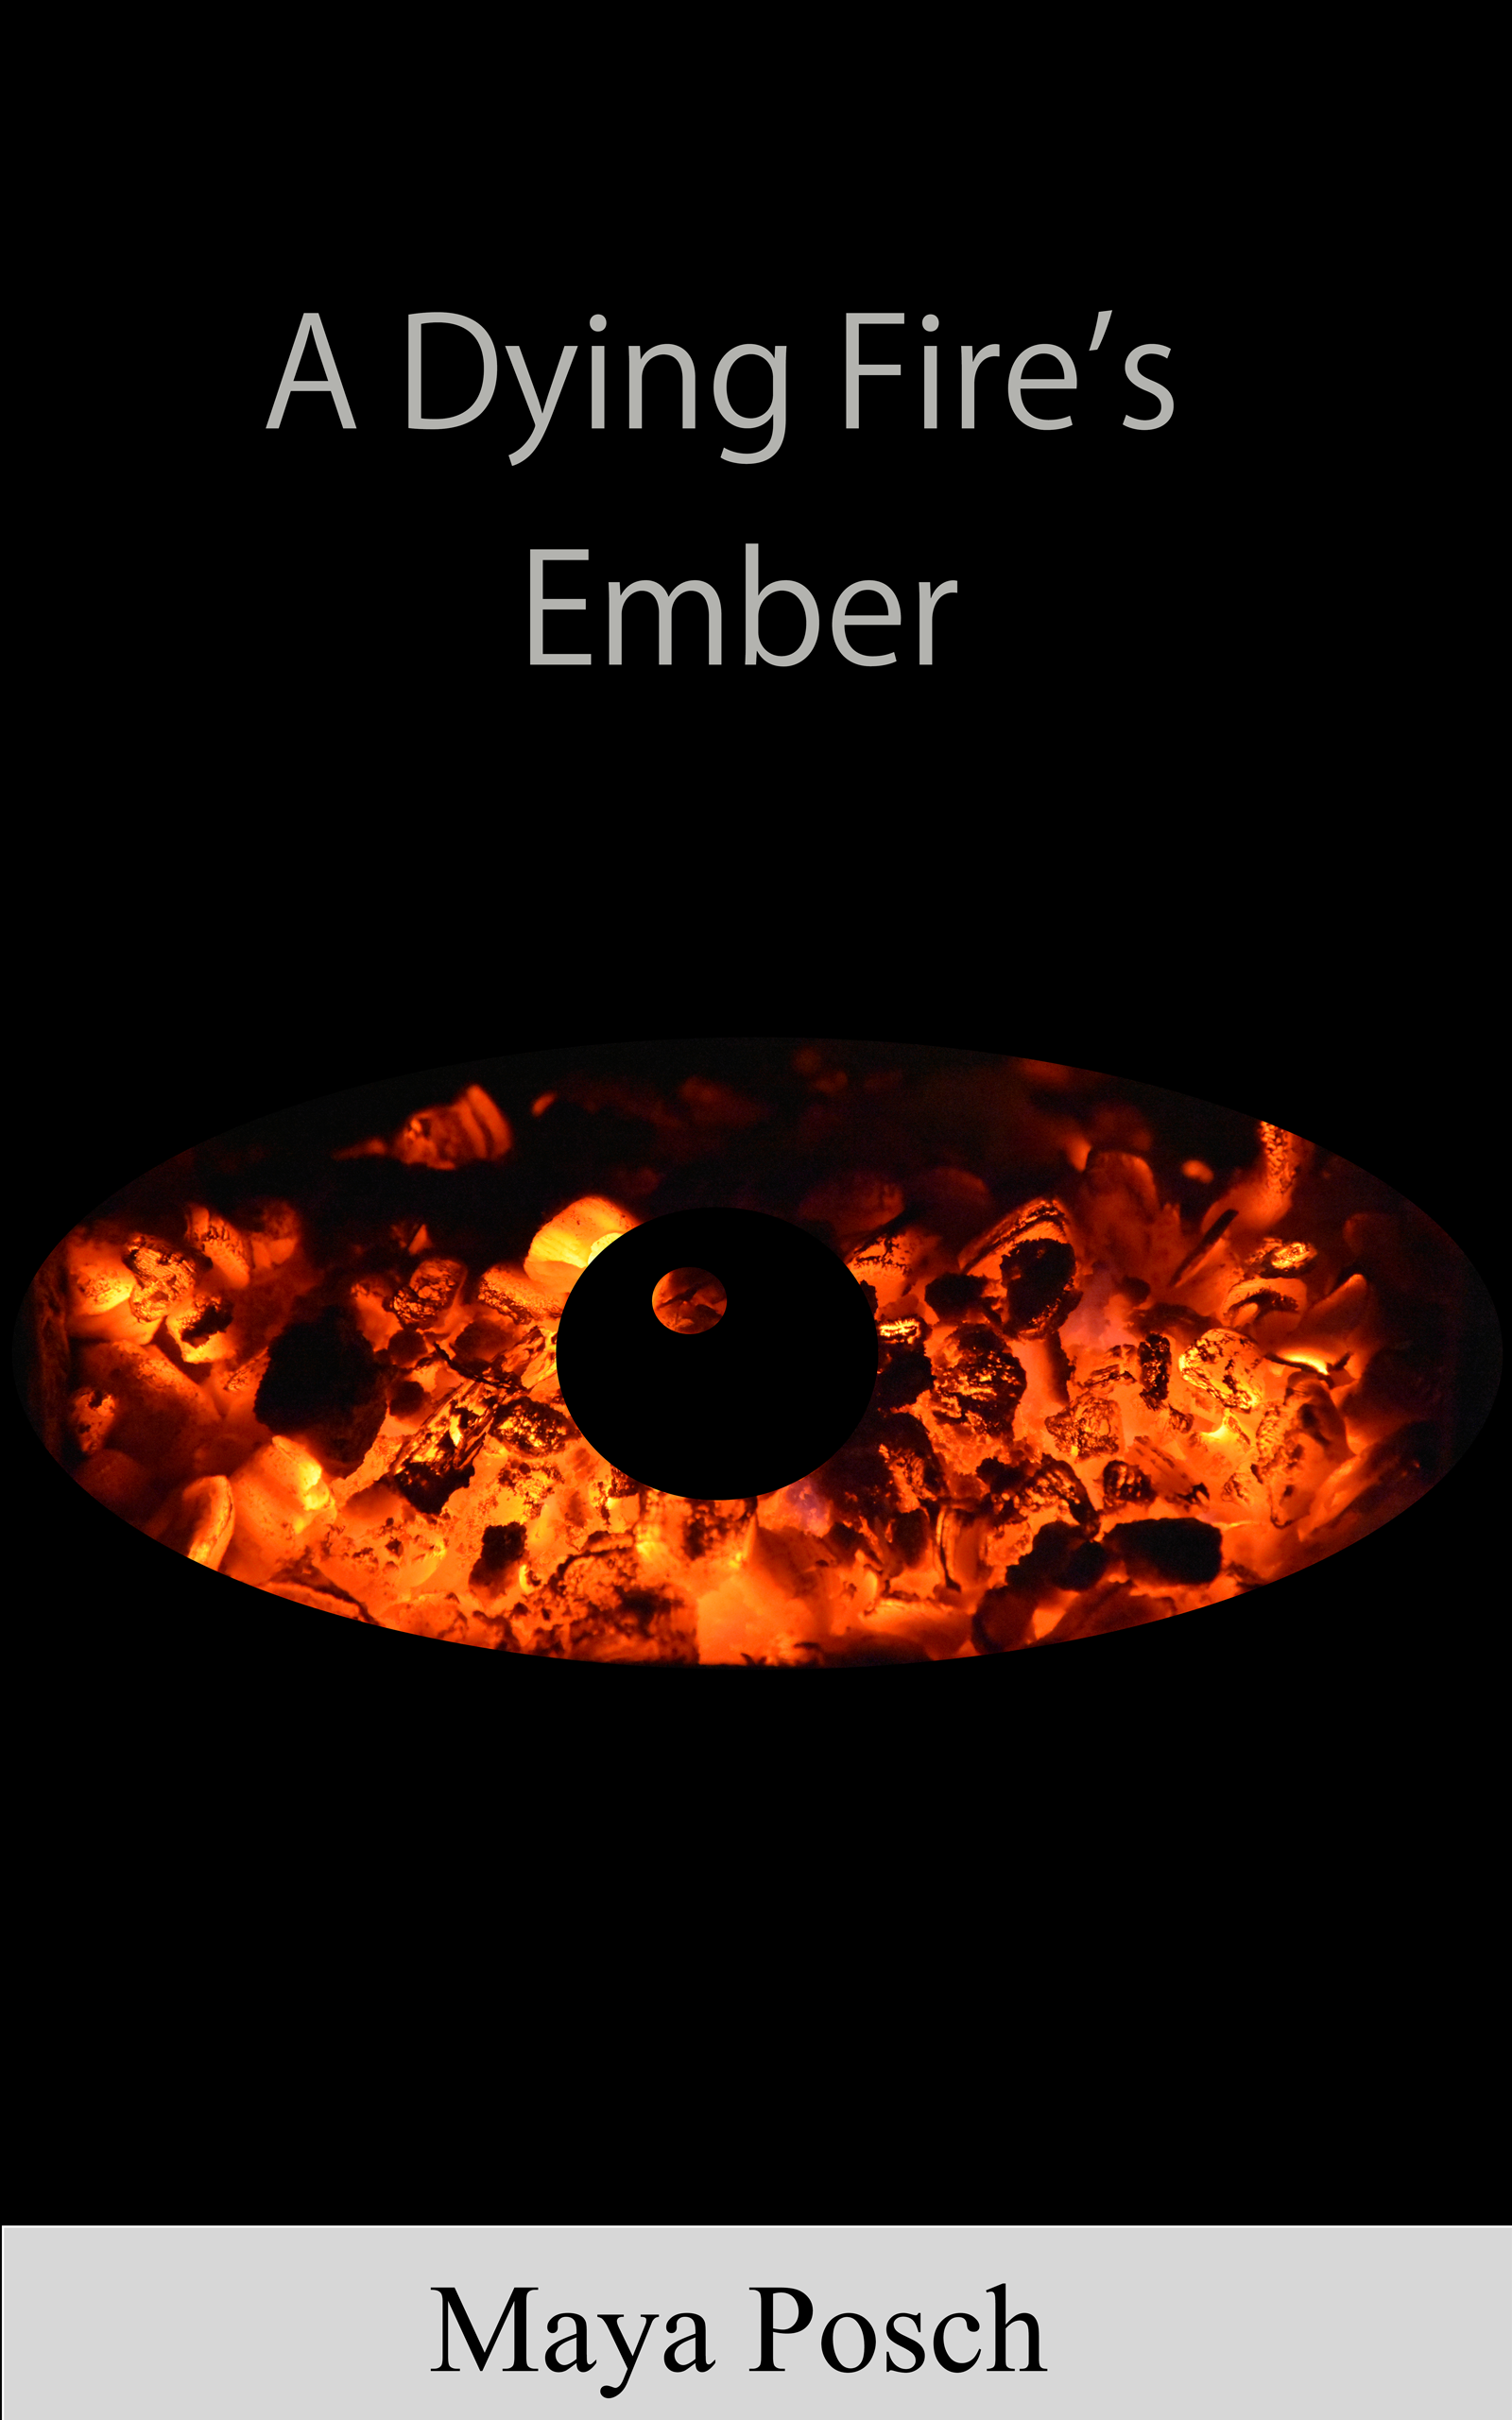 A Dying Fire's Ember